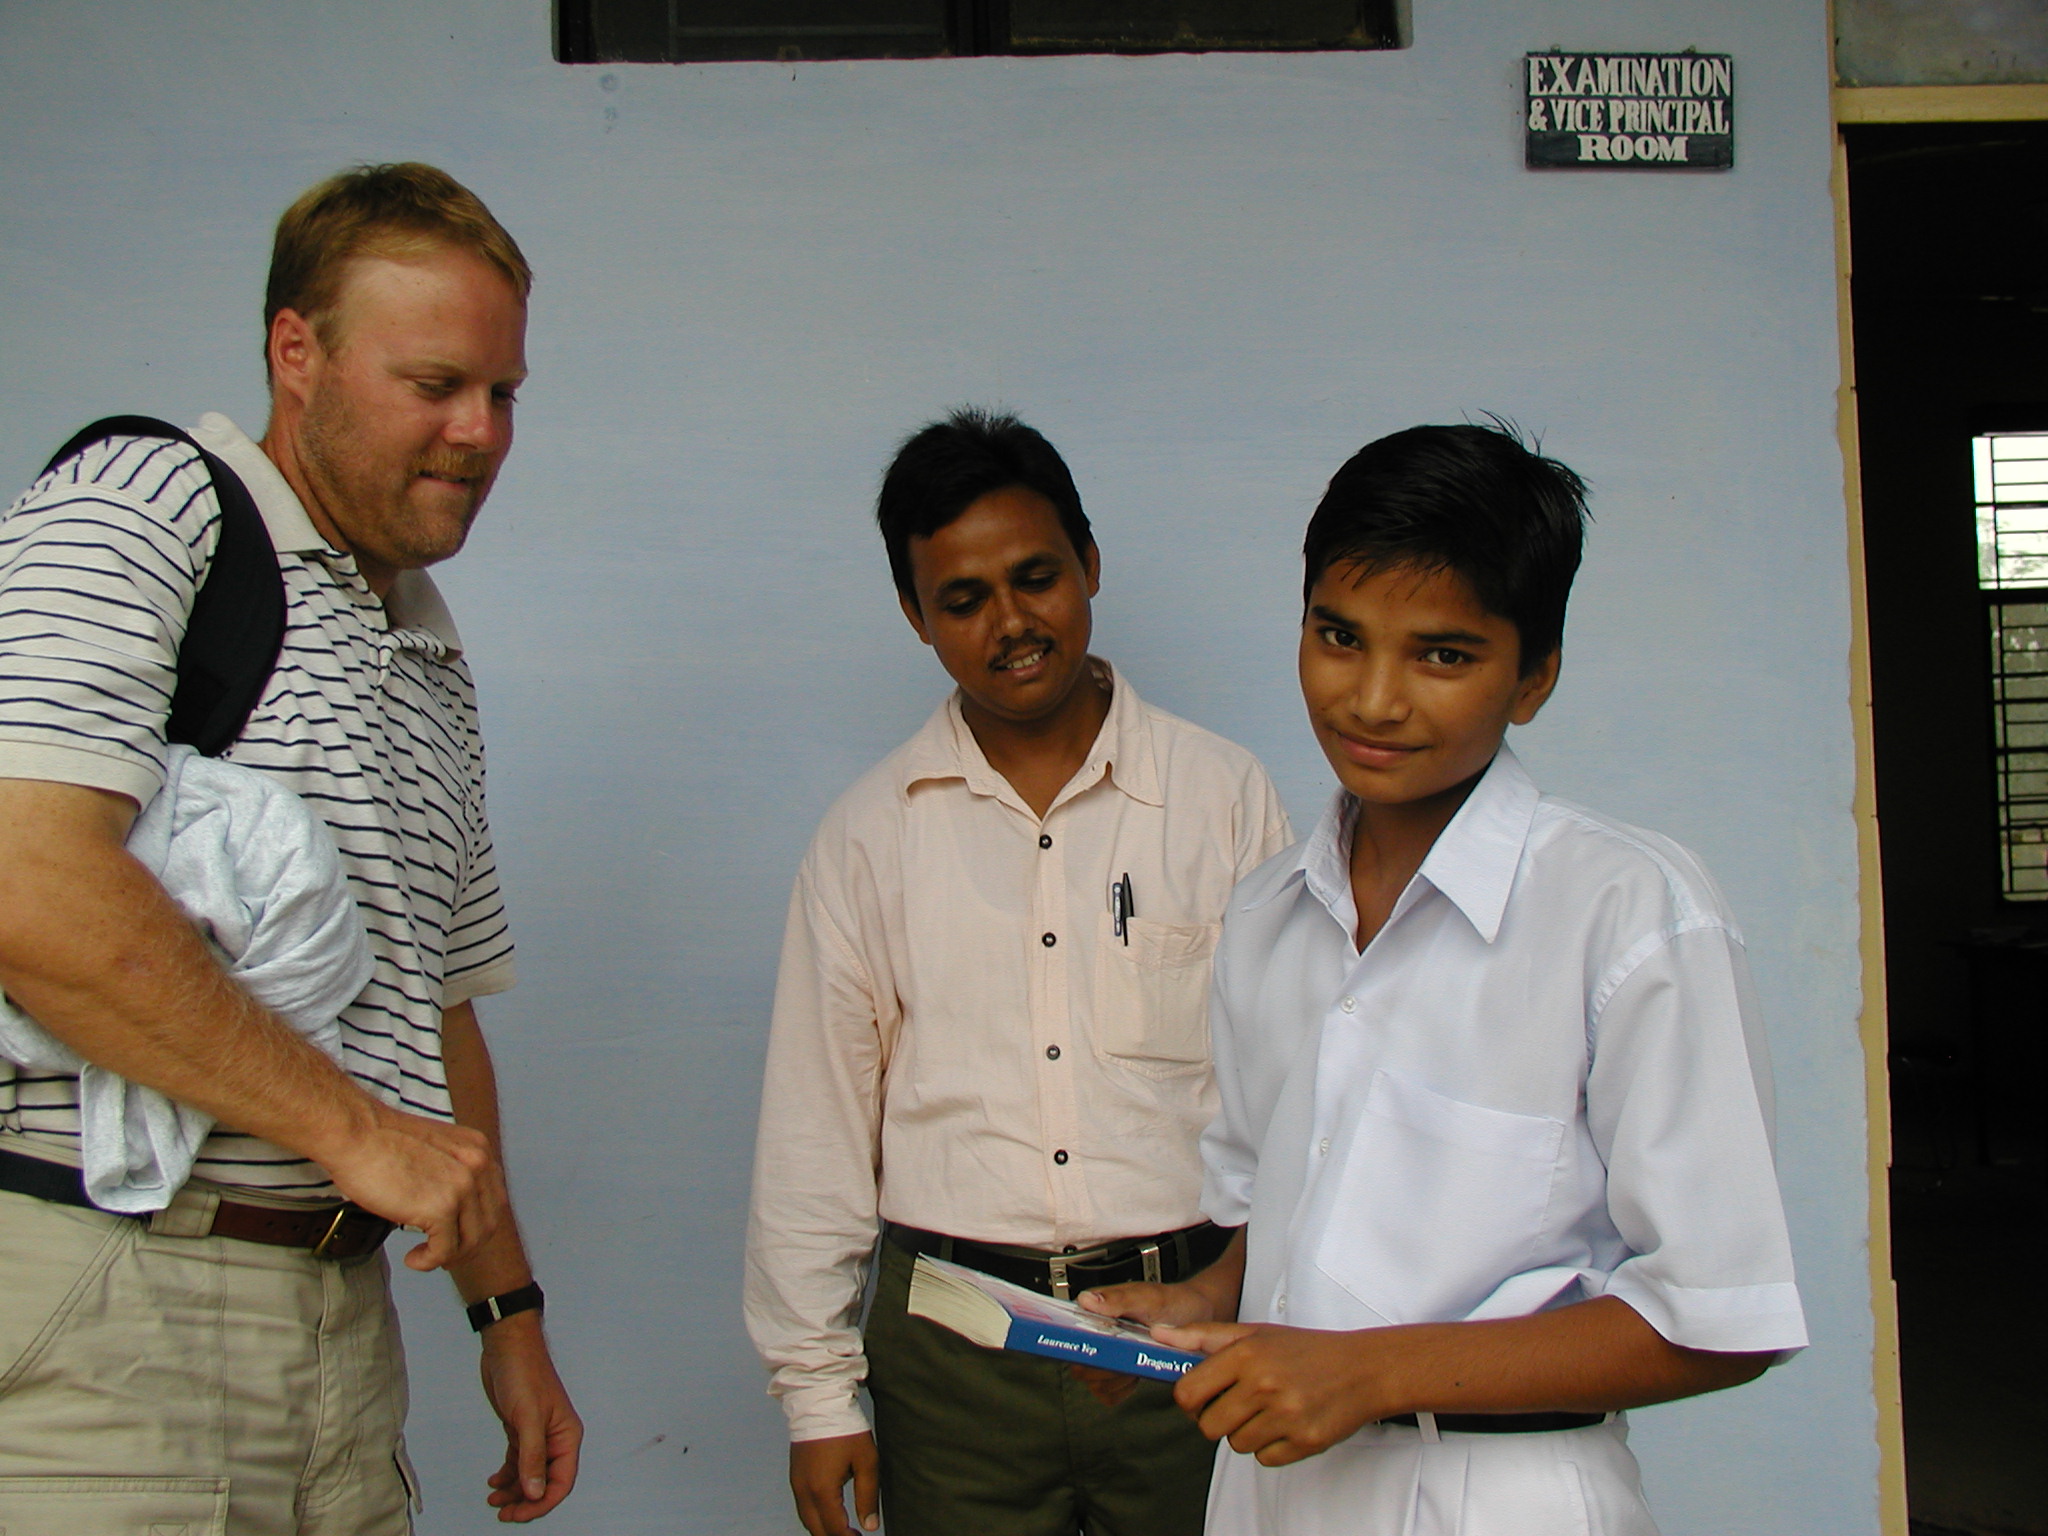 George and two students from Bhandrej School 